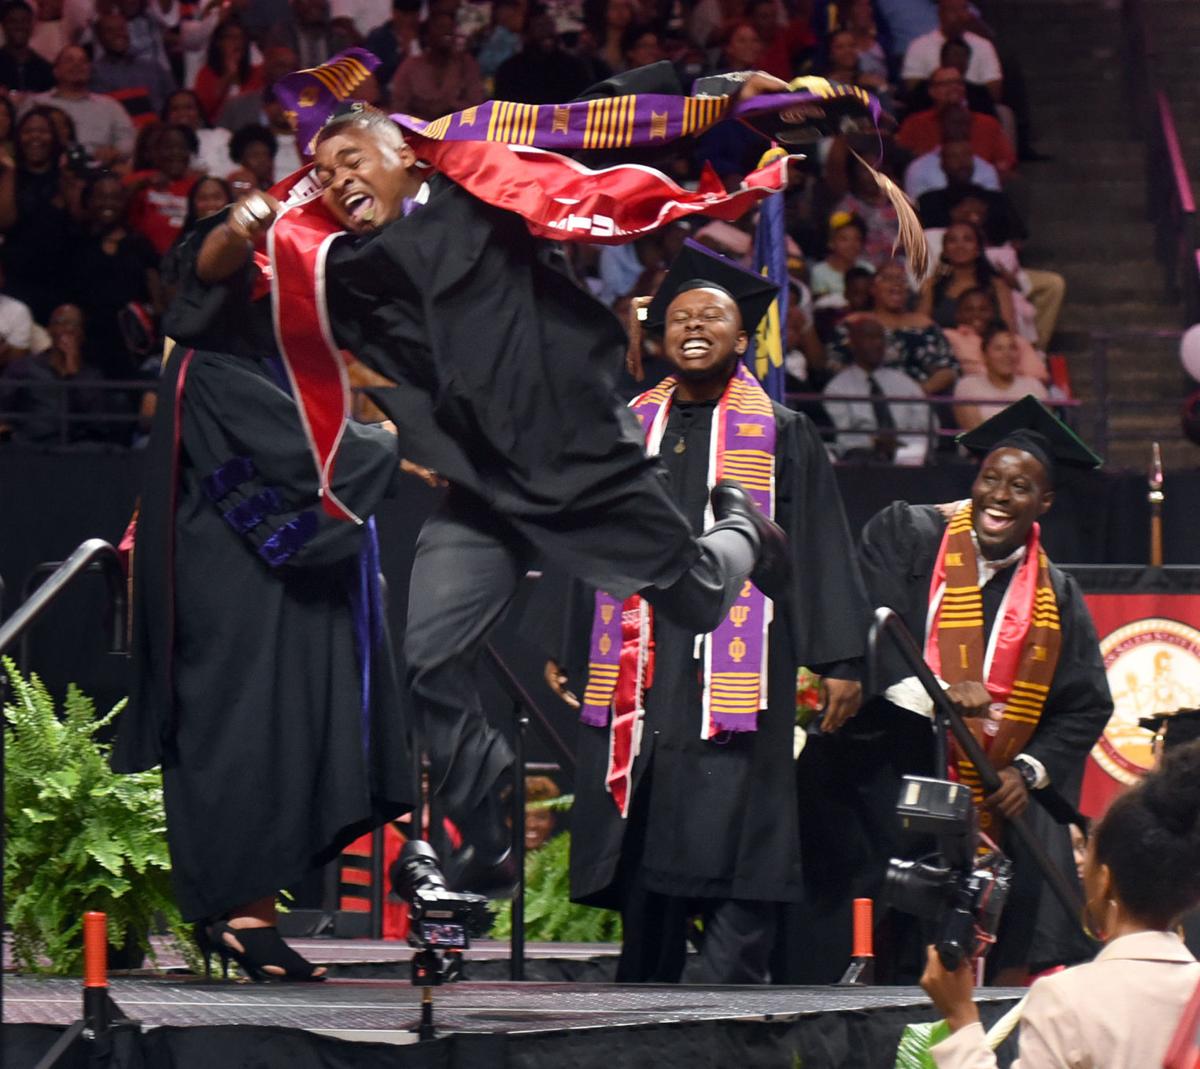 1,200 graduate from WSSU Friday at the Coliseum Local News